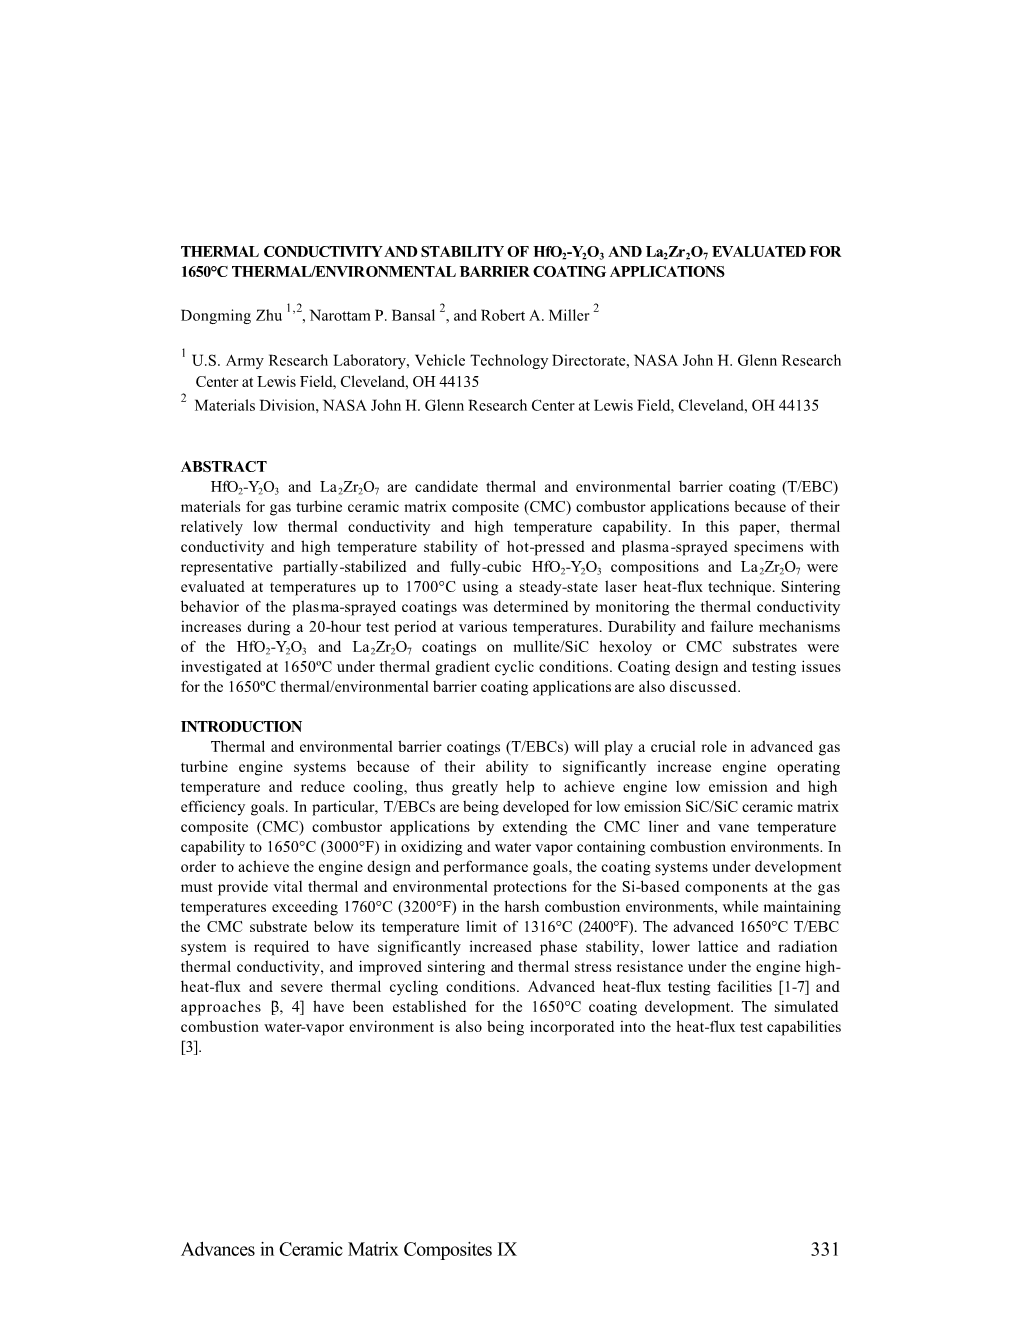 Advances in Ceramic Matrix Composites IX 331 in Order to Develop a T/EBC System for the 1650°C Si-Based Cmcs, a Multi-Functional Coating Concept May Be Considered